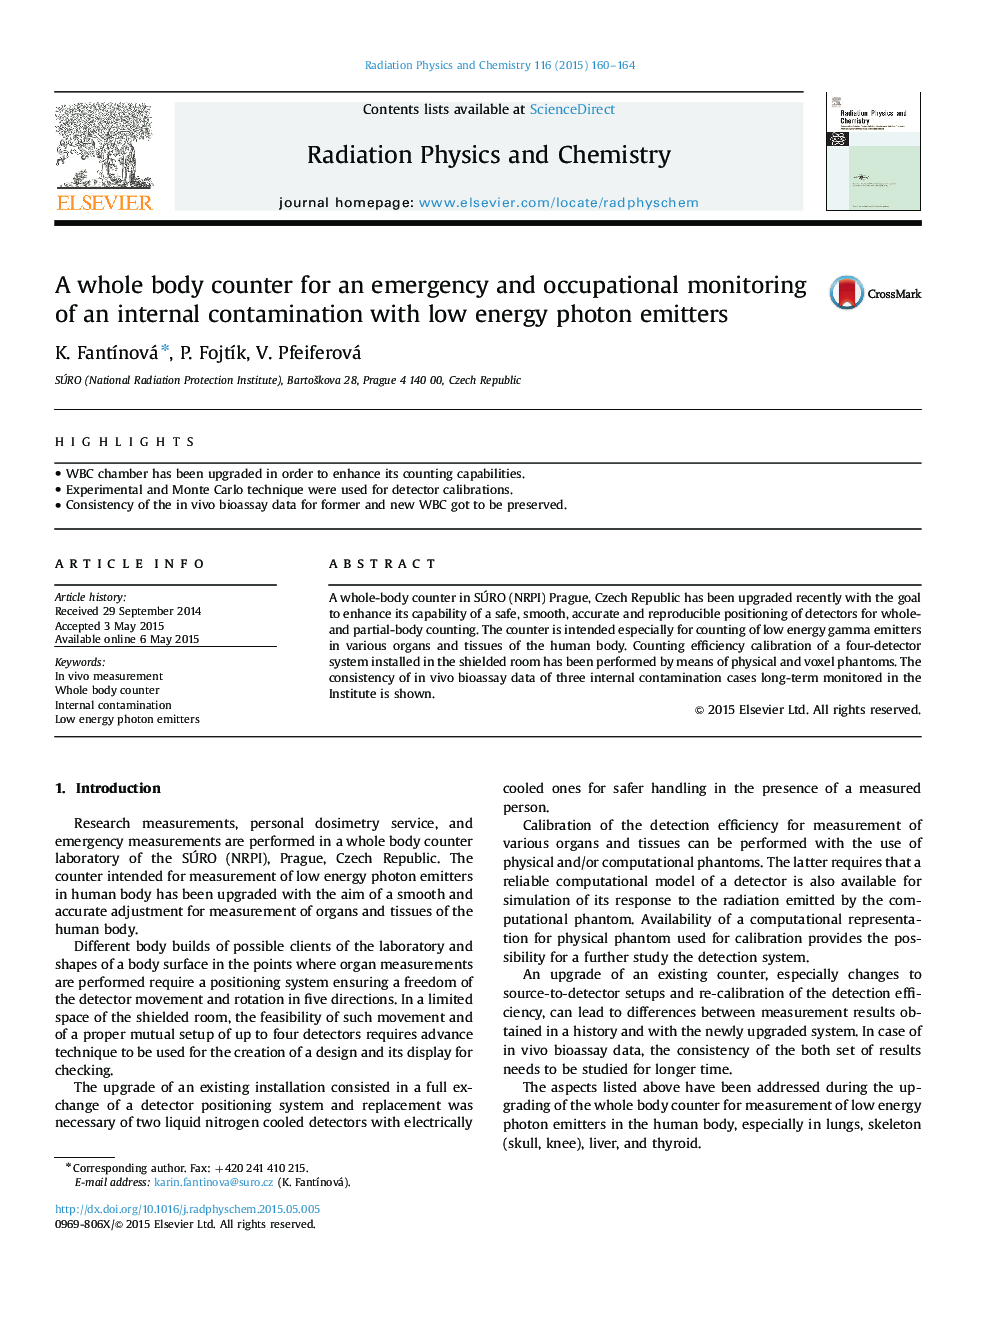 A whole body counter for an emergency and occupational monitoring of an internal contamination with low energy photon emitters